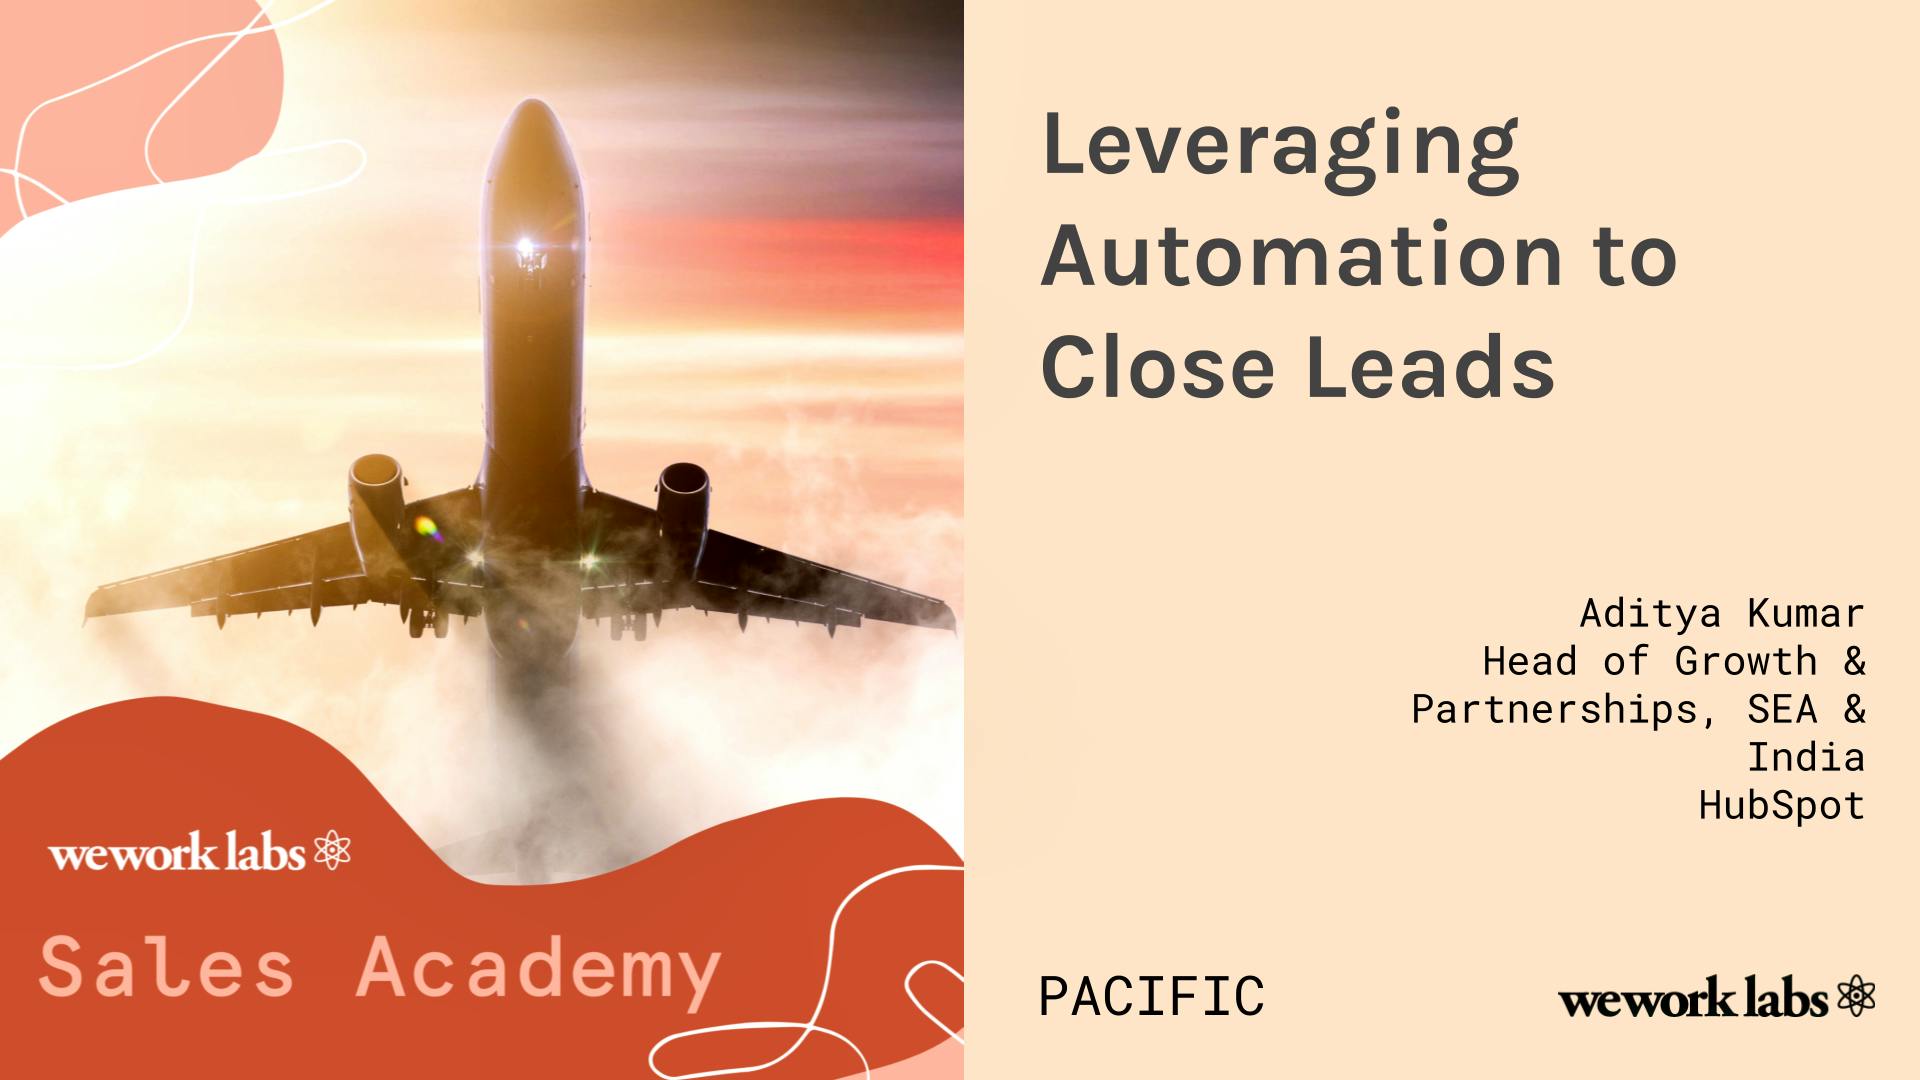 Sales Academy (Pacific): Leveraging Automation to Close Leads